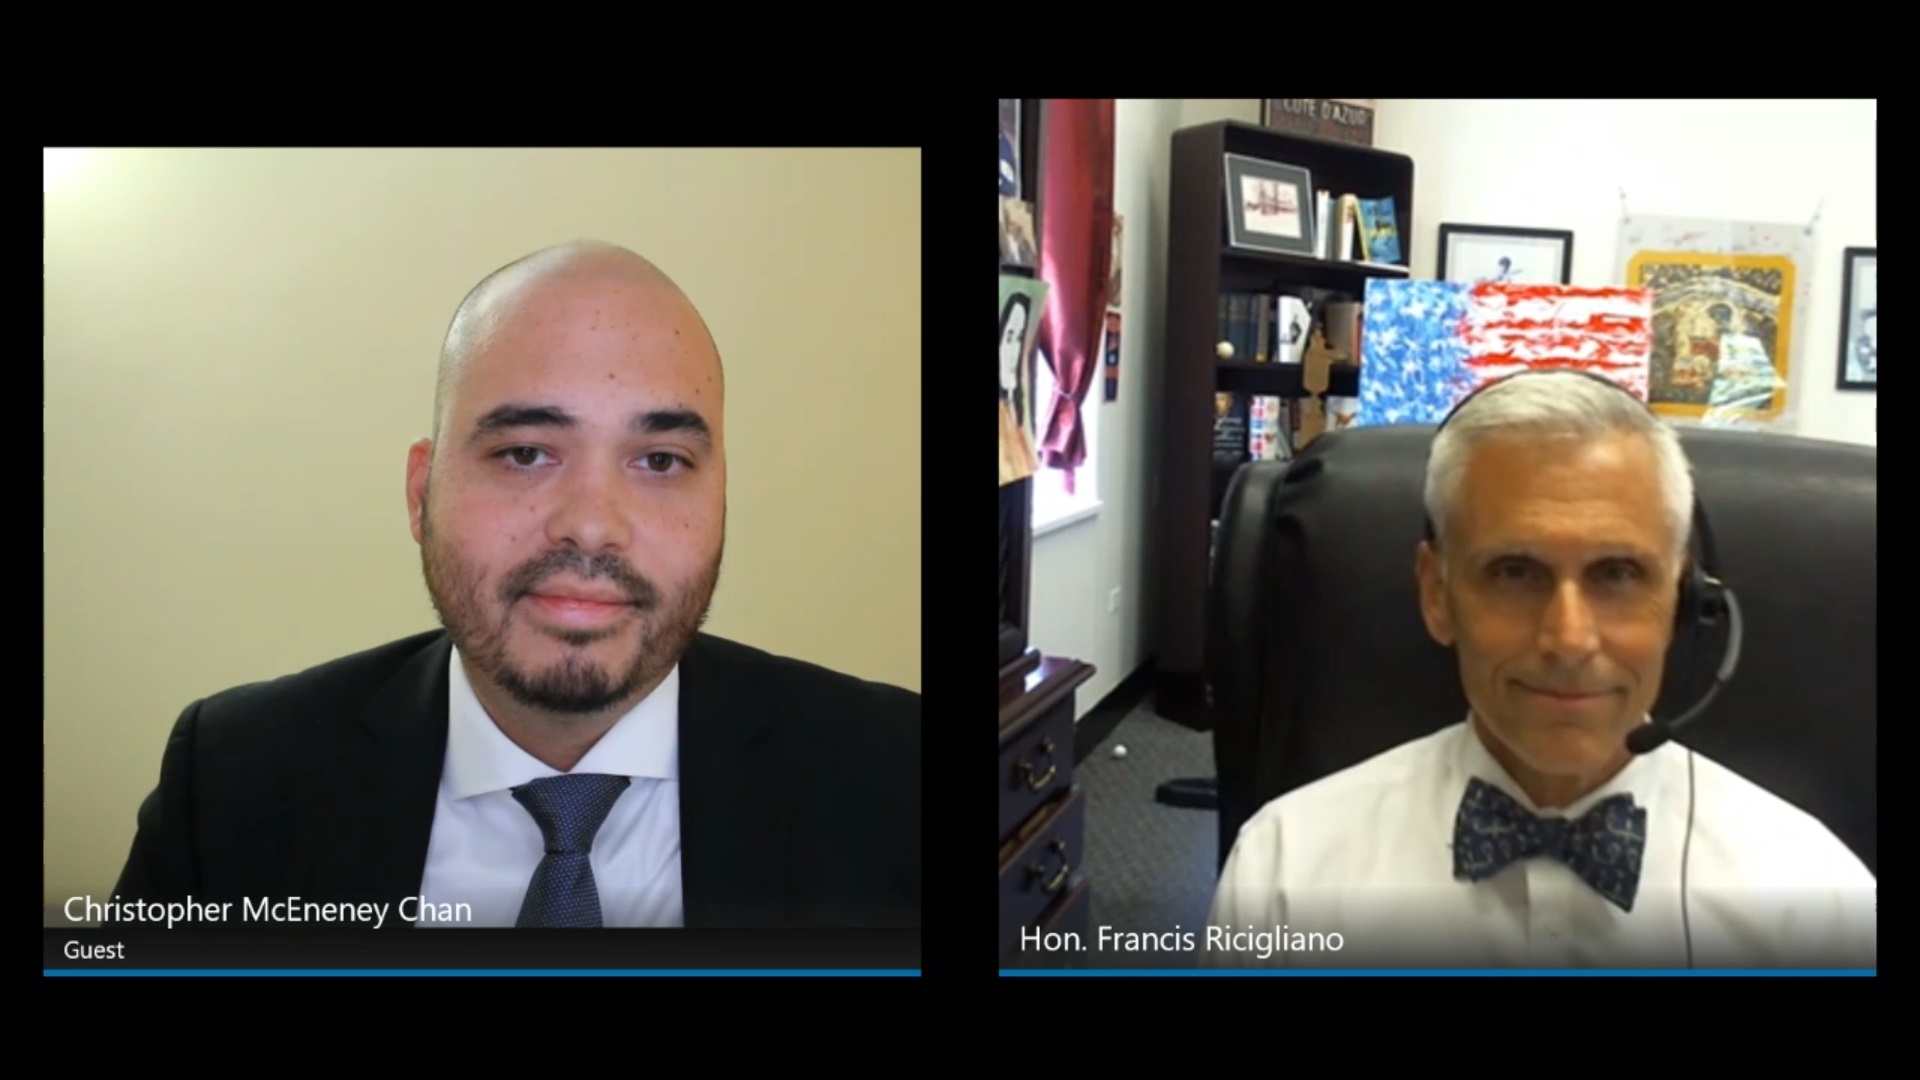 Hon. Francis Ricigliano, Nassau County Court Judge, interviewed by Christopher McEneney Chan